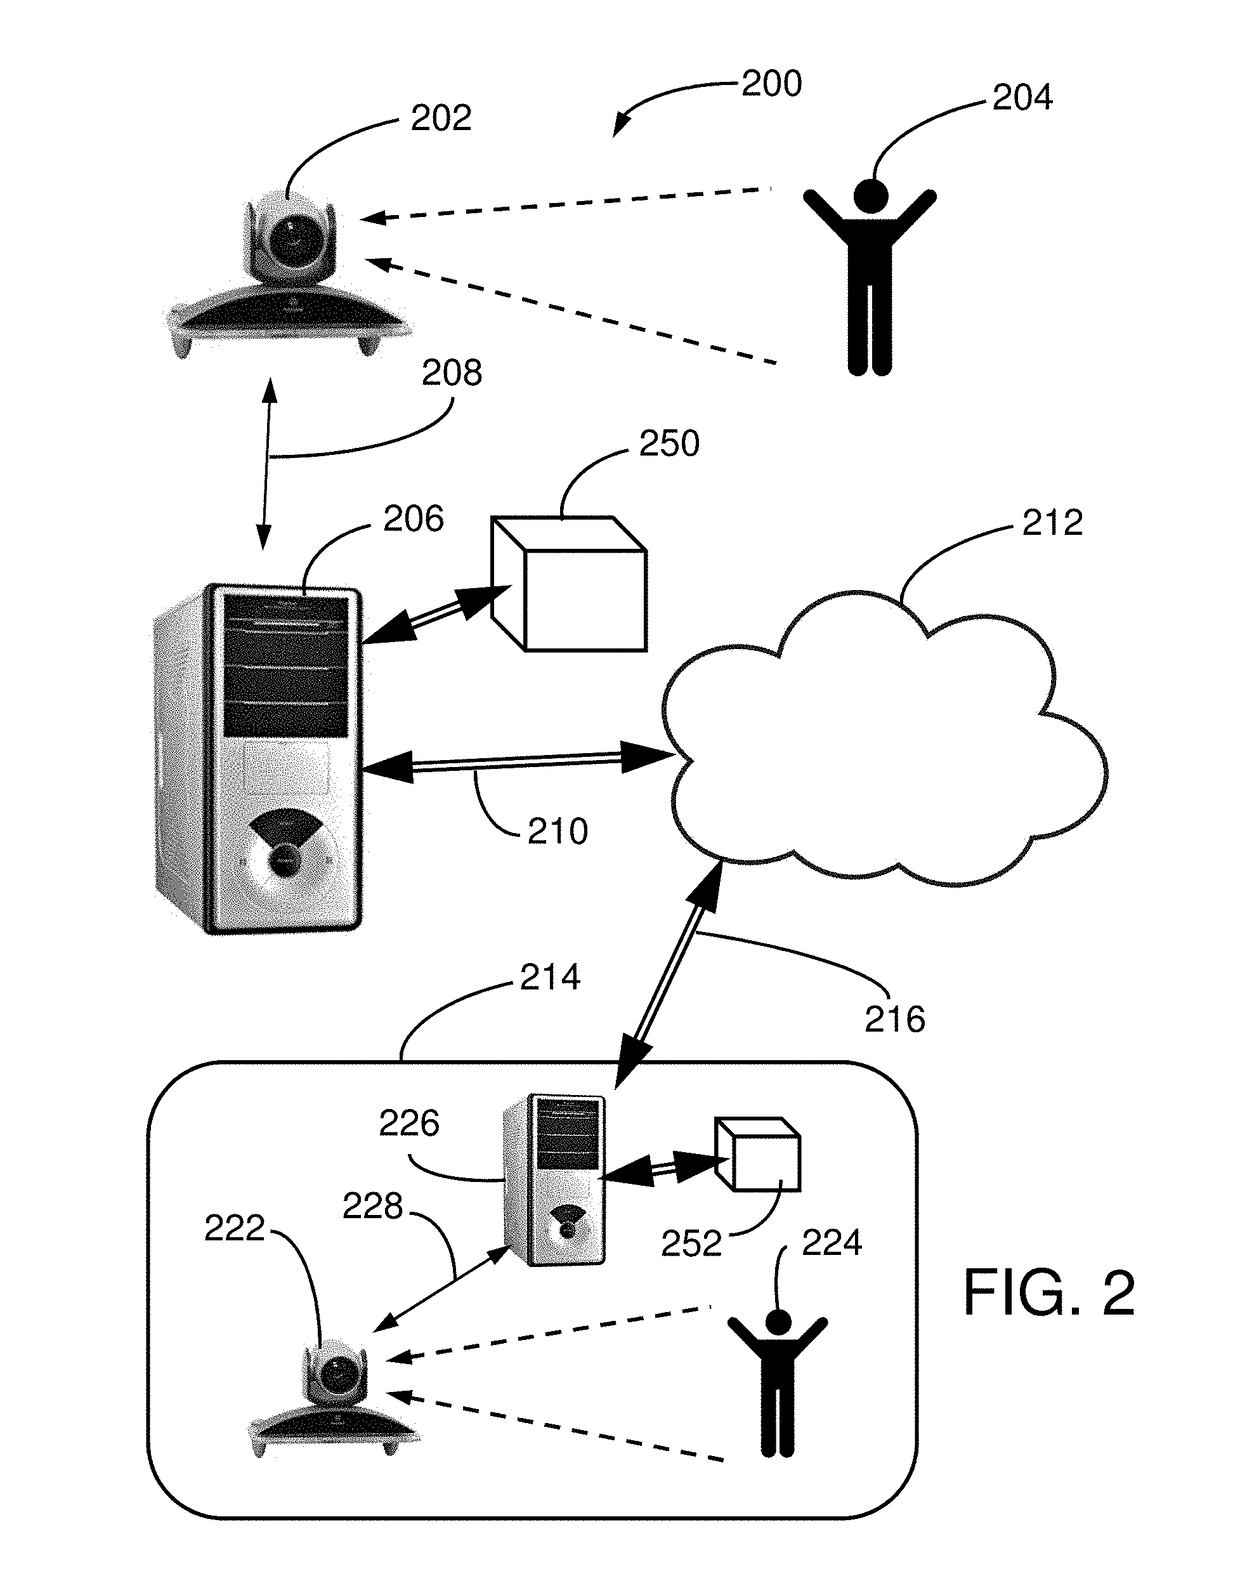 Gesture-based control and usage of video relay service communications